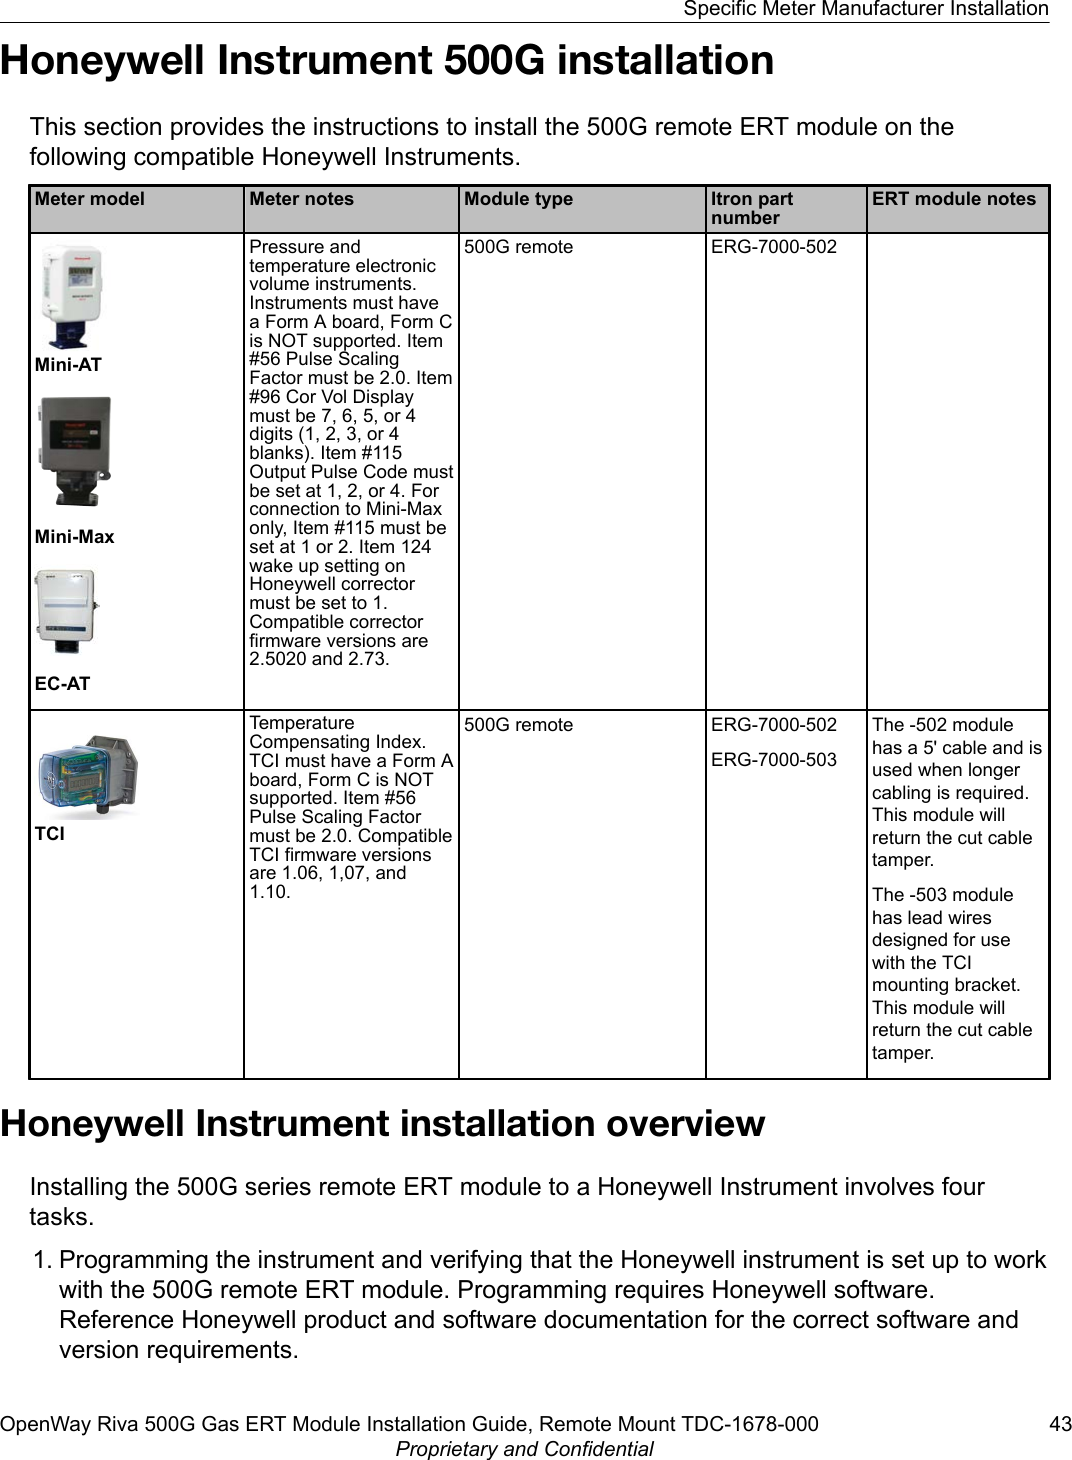 Honeywell Instrument 500G installationThis section provides the instructions to install the 500G remote ERT module on thefollowing compatible Honeywell Instruments.Meter model Meter notes Module type Itron partnumberERT module notesMini-ATMini-MaxEC-ATPressure andtemperature electronicvolume instruments.Instruments must havea Form A board, Form Cis NOT supported. Item#56 Pulse ScalingFactor must be 2.0. Item#96 Cor Vol Displaymust be 7, 6, 5, or 4digits (1, 2, 3, or 4blanks). Item #115Output Pulse Code mustbe set at 1, 2, or 4. Forconnection to Mini-Maxonly, Item #115 must beset at 1 or 2. Item 124wake up setting onHoneywell correctormust be set to 1.Compatible correctorfirmware versions are2.5020 and 2.73.500G remote ERG-7000-502TCITemperatureCompensating Index.TCI must have a Form Aboard, Form C is NOTsupported. Item #56Pulse Scaling Factormust be 2.0. CompatibleTCI firmware versionsare 1.06, 1,07, and1.10.500G remote ERG-7000-502ERG-7000-503The -502 modulehas a 5&apos; cable and isused when longercabling is required.This module willreturn the cut cabletamper.The -503 modulehas lead wiresdesigned for usewith the TCImounting bracket.This module willreturn the cut cabletamper.Honeywell Instrument installation overviewInstalling the 500G series remote ERT module to a Honeywell Instrument involves fourtasks.1. Programming the instrument and verifying that the Honeywell instrument is set up to workwith the 500G remote ERT module. Programming requires Honeywell software.Reference Honeywell product and software documentation for the correct software andversion requirements.Specific Meter Manufacturer InstallationOpenWay Riva 500G Gas ERT Module Installation Guide, Remote Mount TDC-1678-000 43Proprietary and Confidential